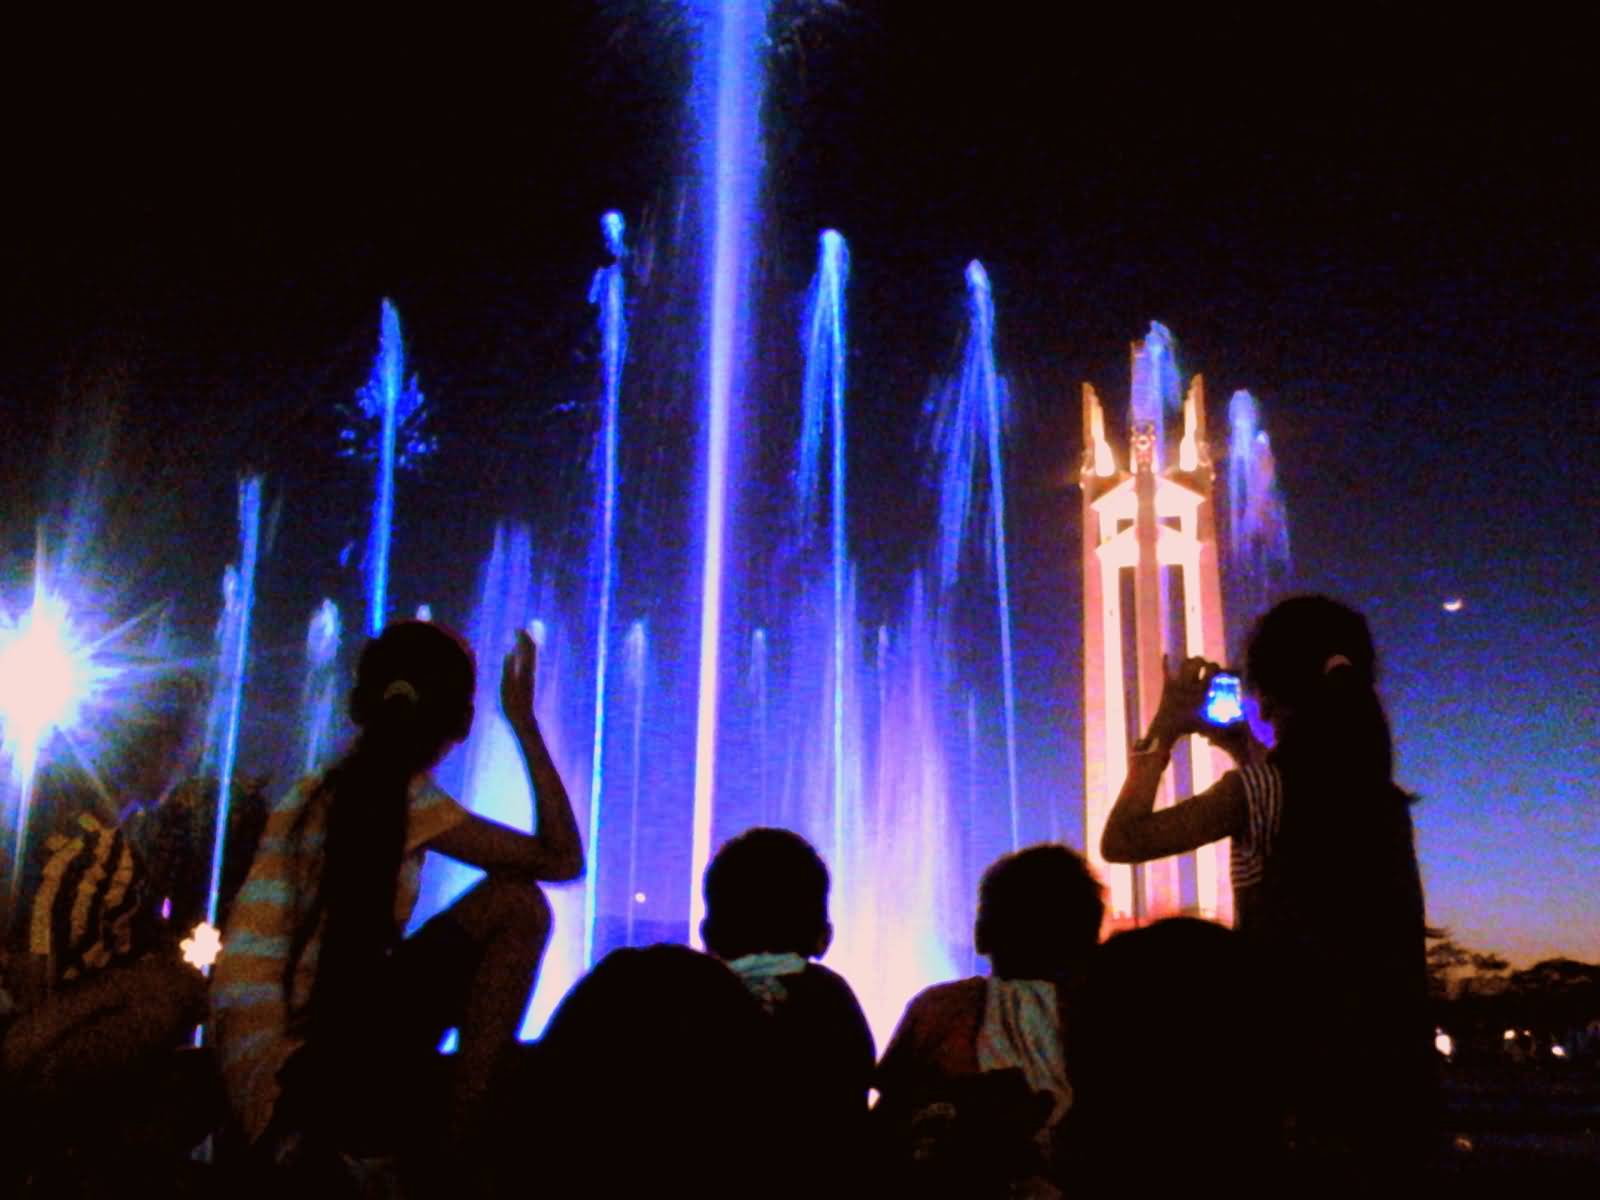 Tourists Enjoy The Night View Of Quezon Memorial Shrine And Fountains Show